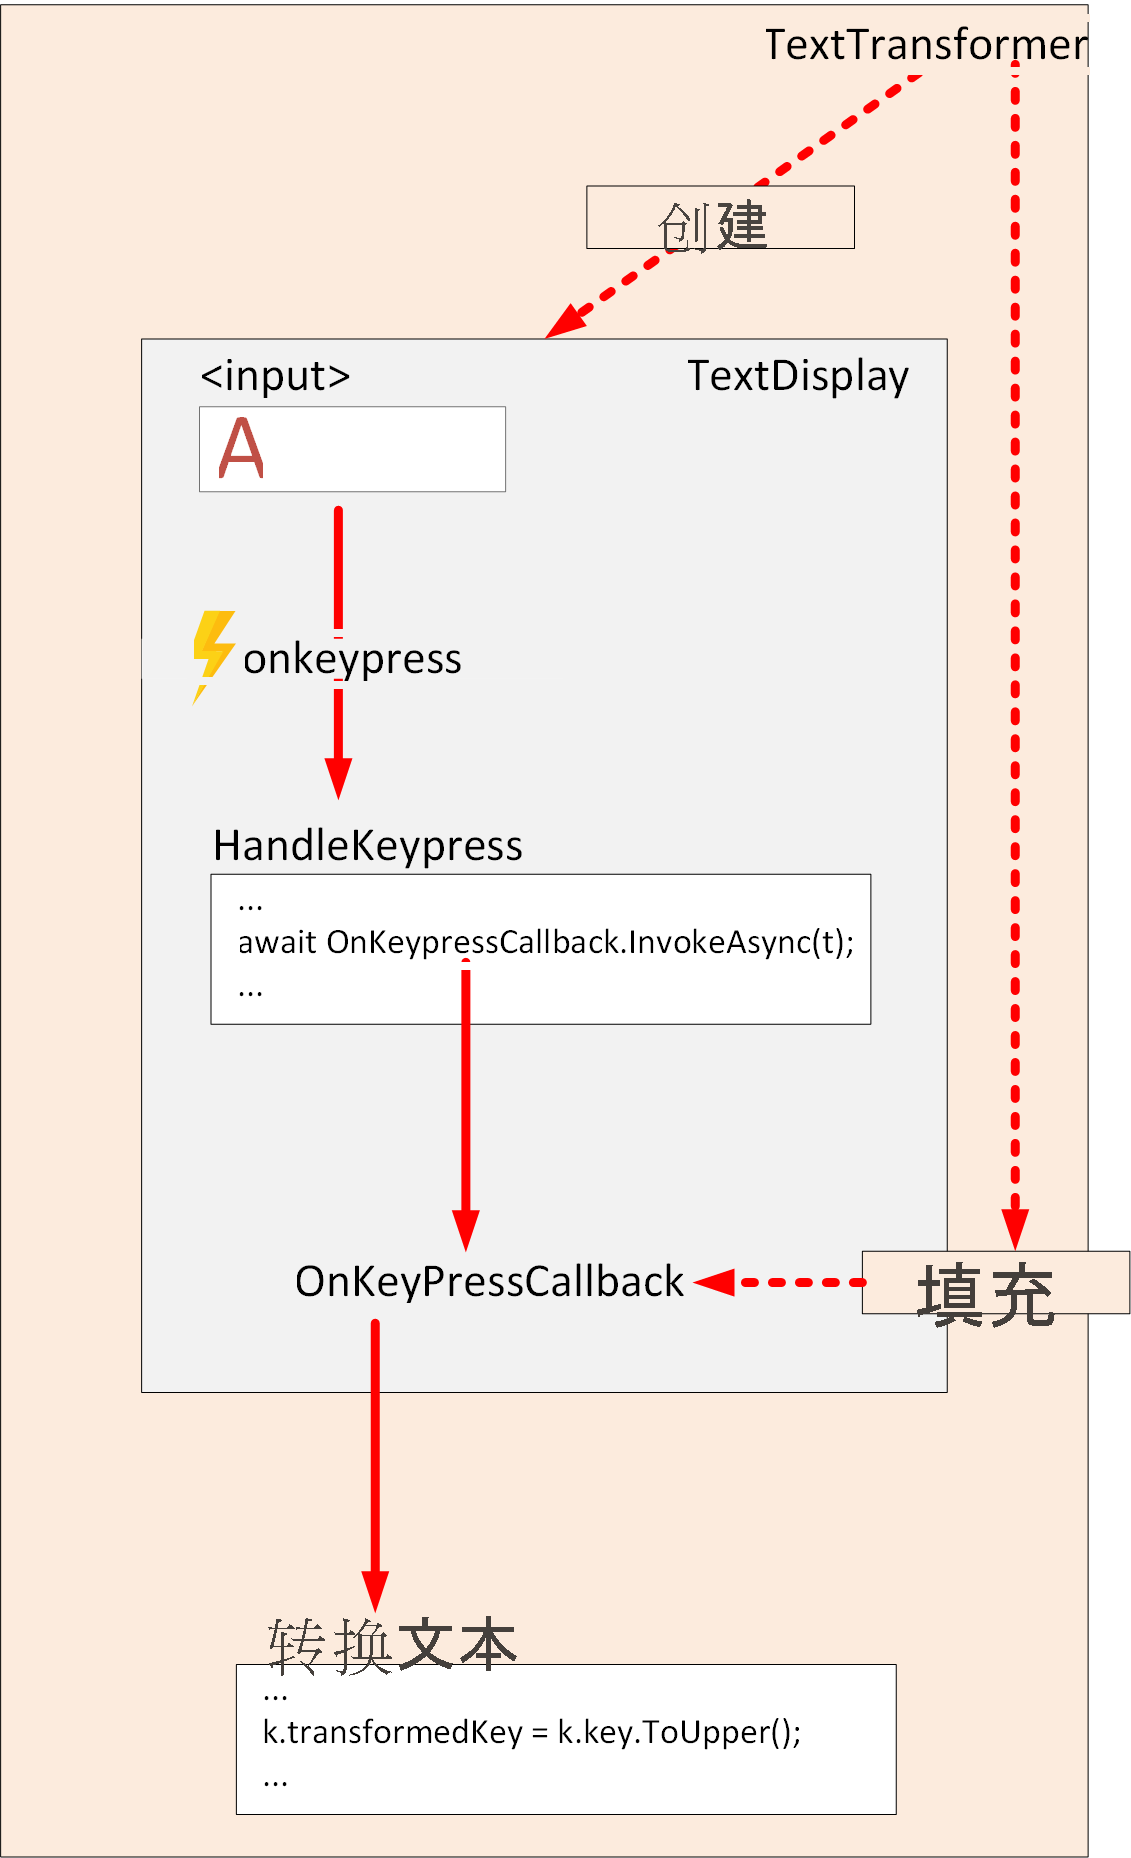 Diagram of the flow of control with an EventCallback in a child component.